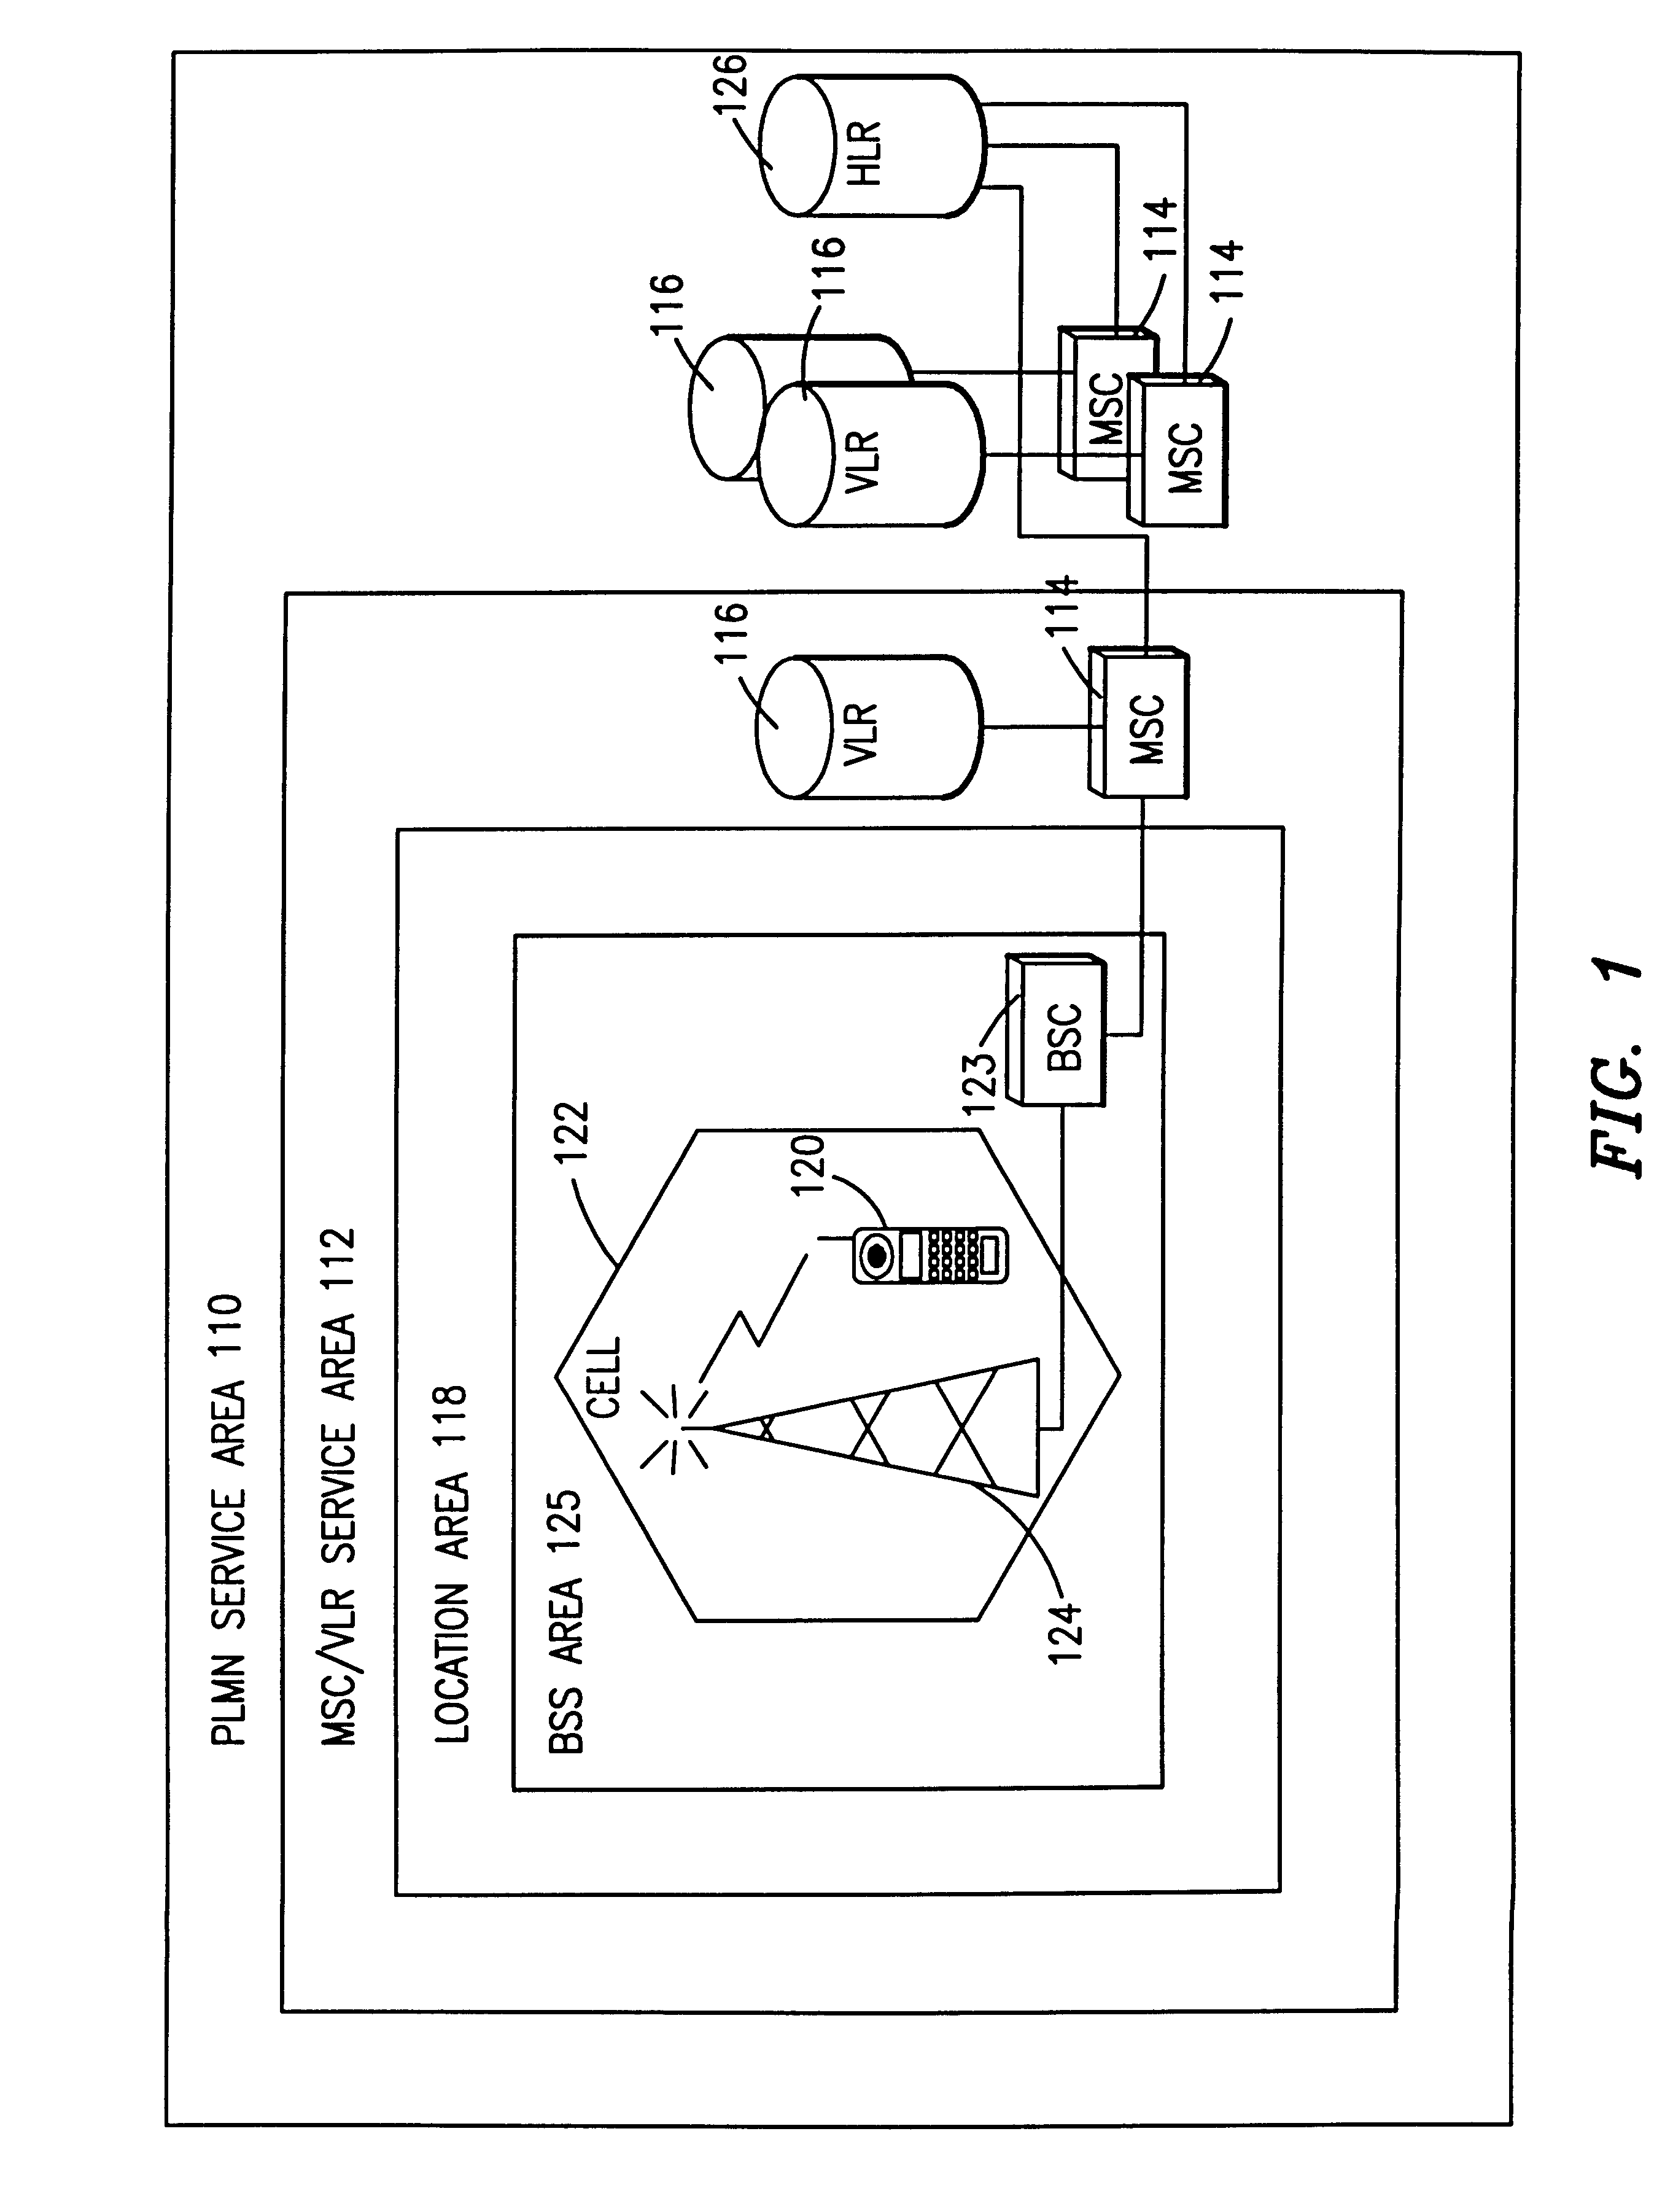 System, method, and apparatus for delivery of location information about caller